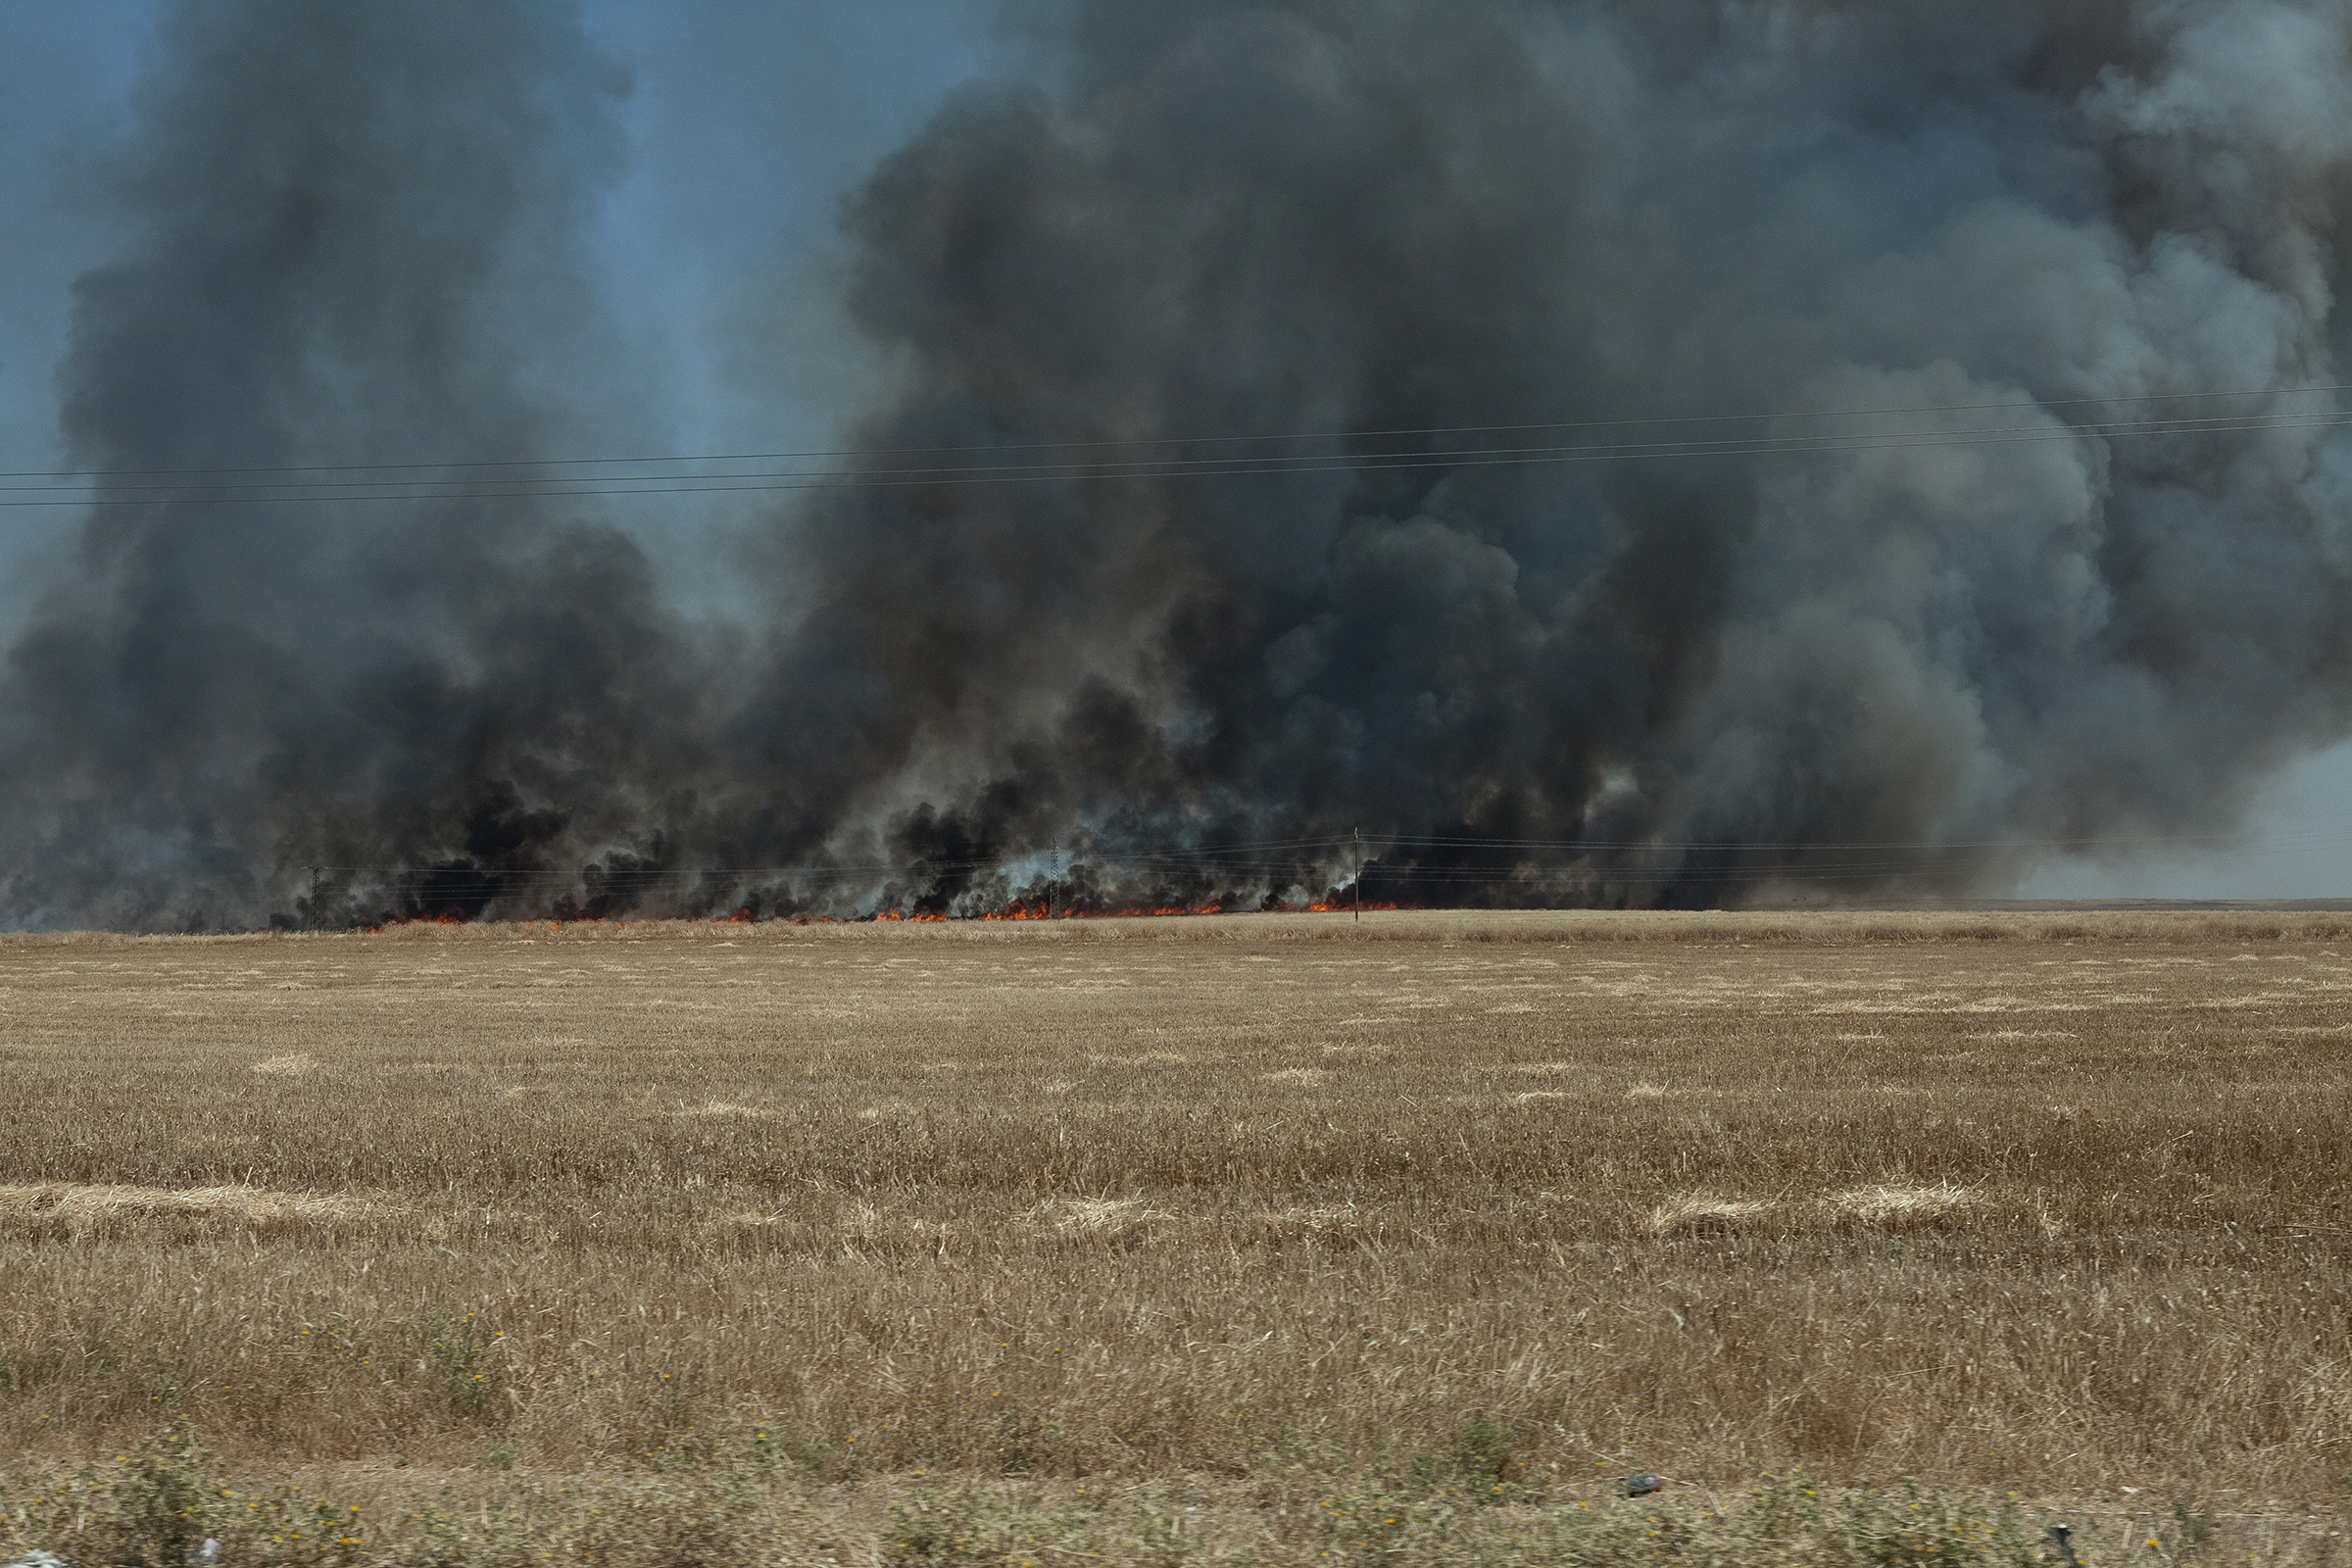 A field burns on the road between Al-Maabadah and Qamishli in June 2019. The dominating rumor among the Kurdish population was the fires were set by ISIS sleeper cells.